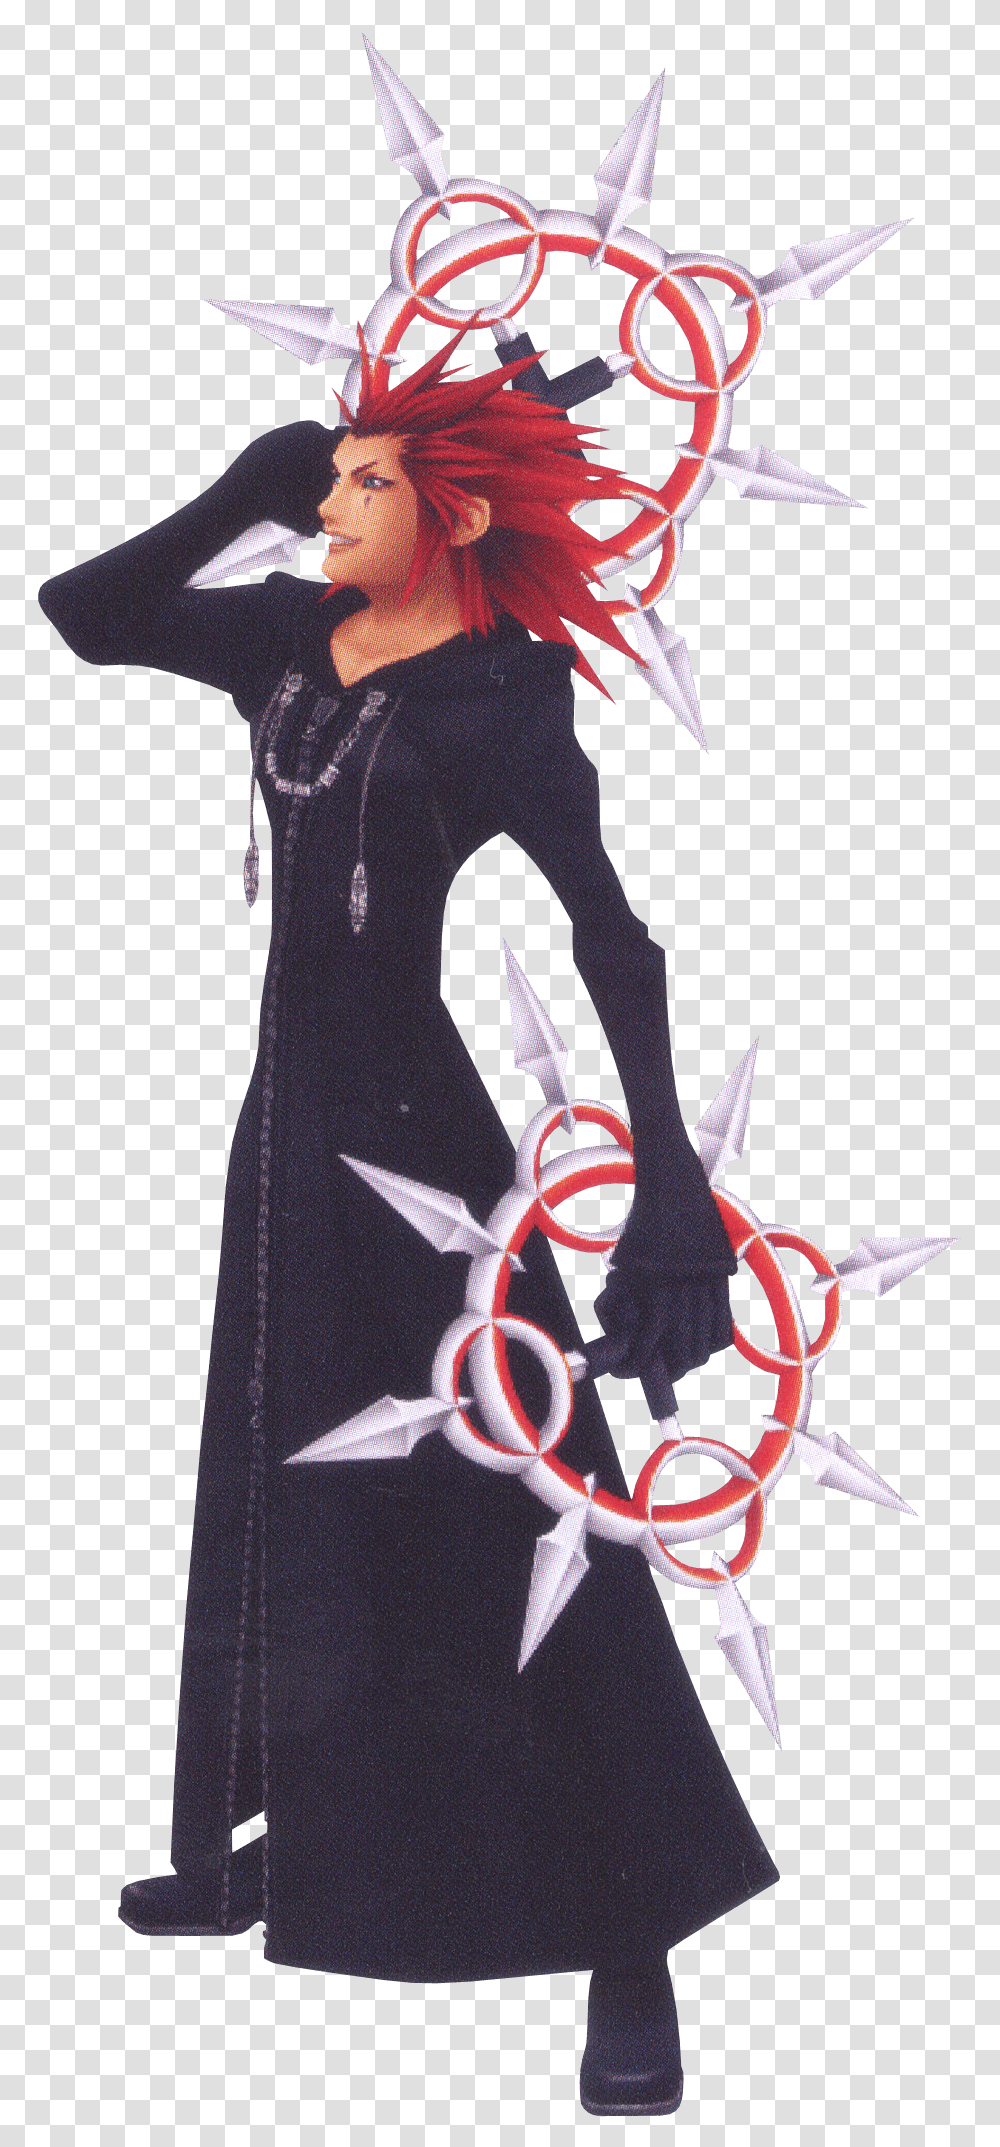 Kingdom Hearts 2 Axel Wallpapers Hd Kingdom Hearts, Clothing, Person, Dance Pose, Leisure Activities Transparent Png